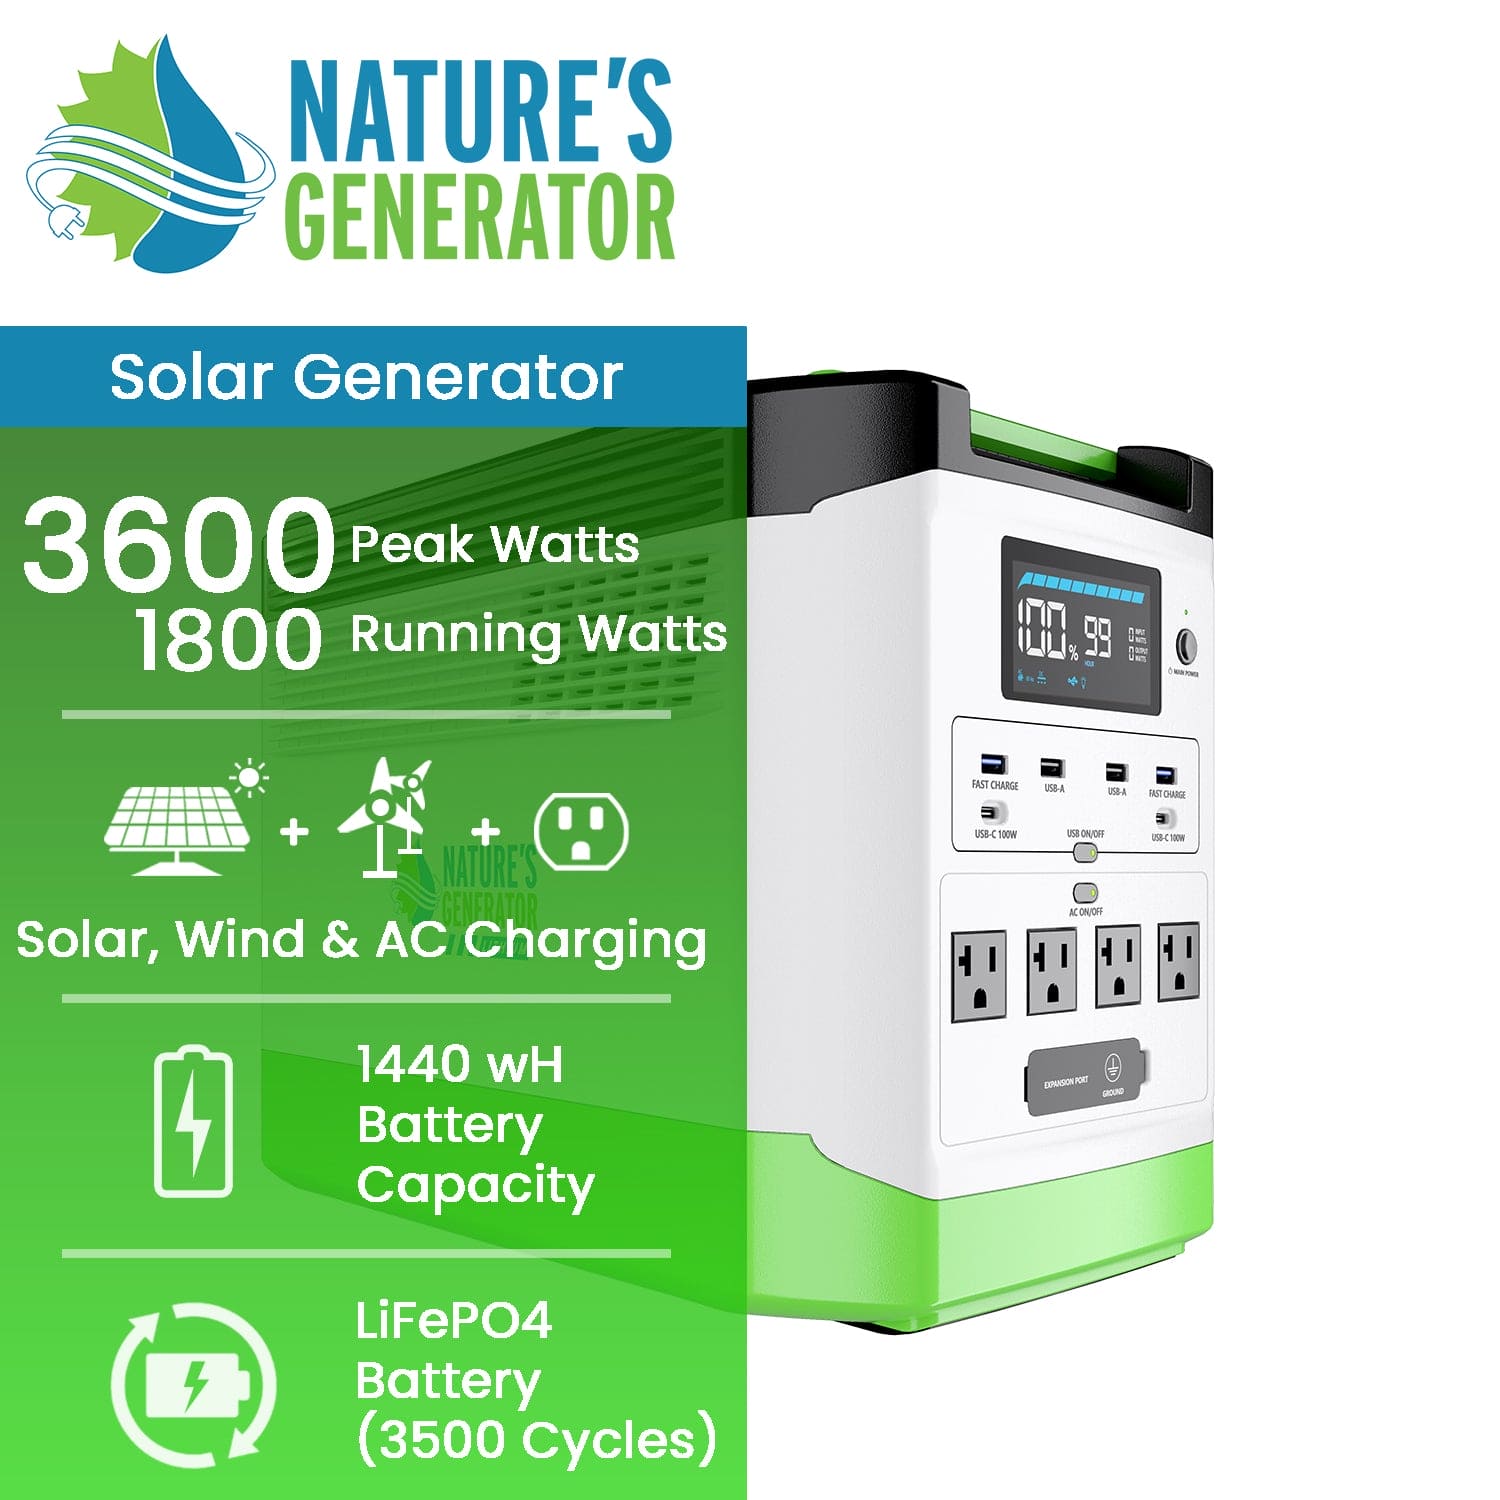 1800W LiFePO4 Portable Power Station / Solar, Wind, and AC charging ready - Nature's Generator Lithium 1800 Quick Specification